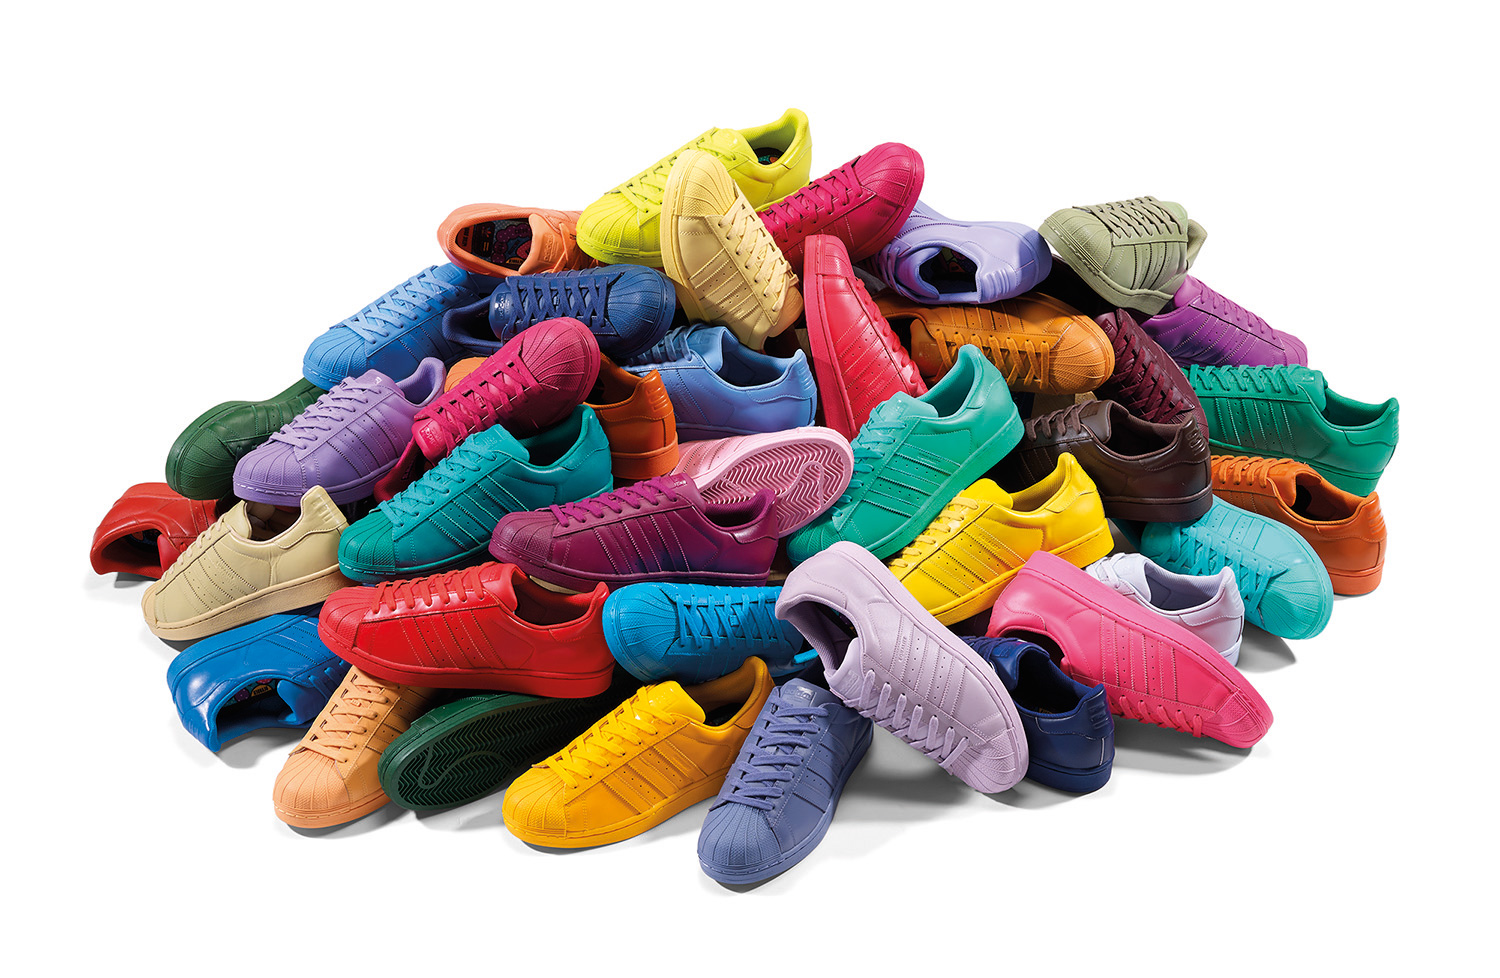 adidas by Pharrell Superstar “Supercolor” Video